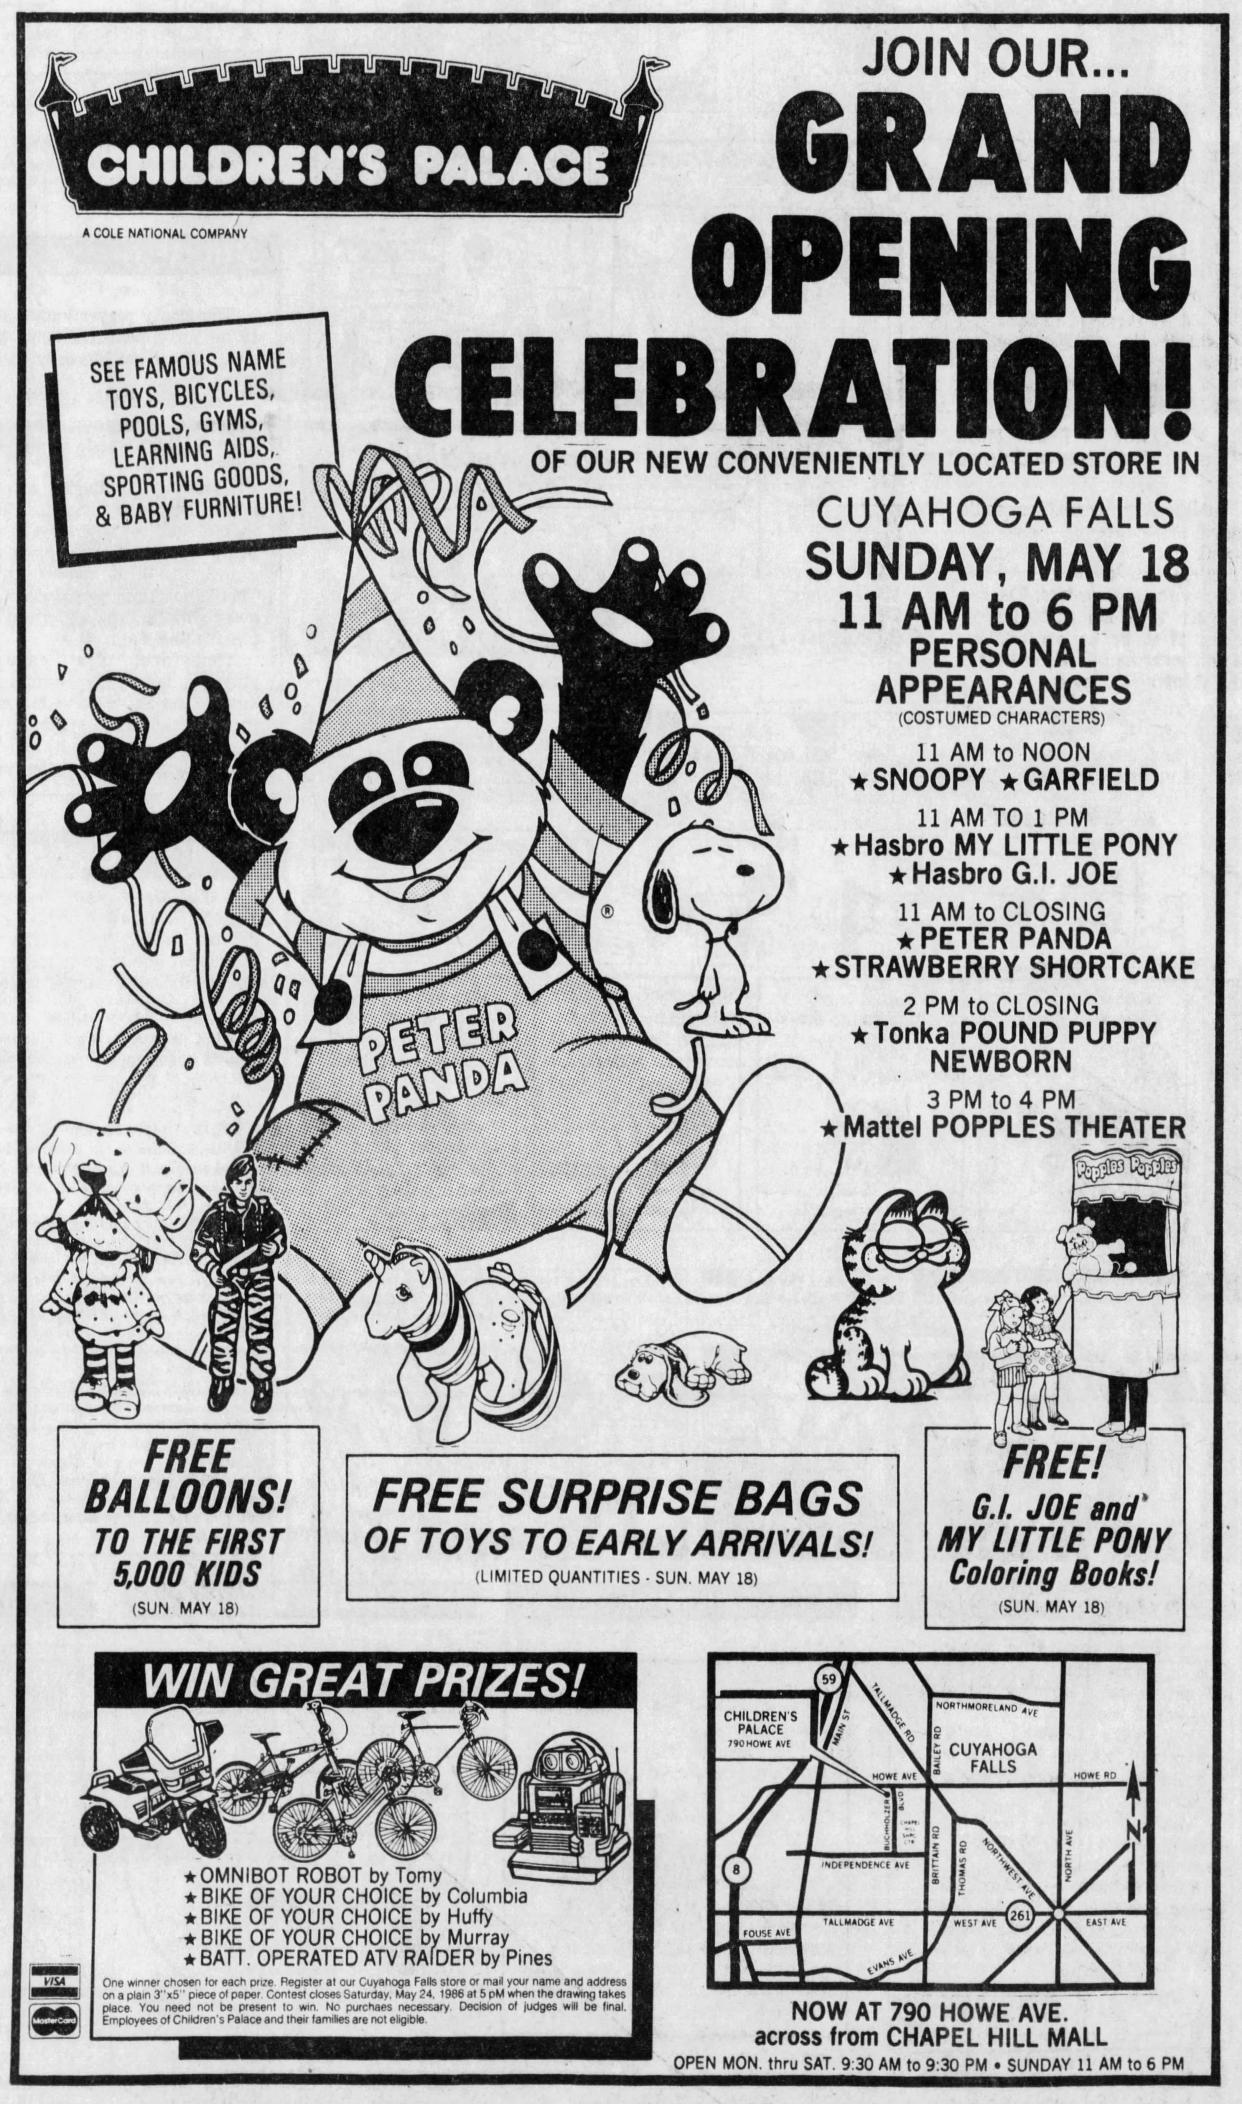 Children’s Palace advertises its new store on Howe Avenue in Cuyahoga Falls in May 1986.